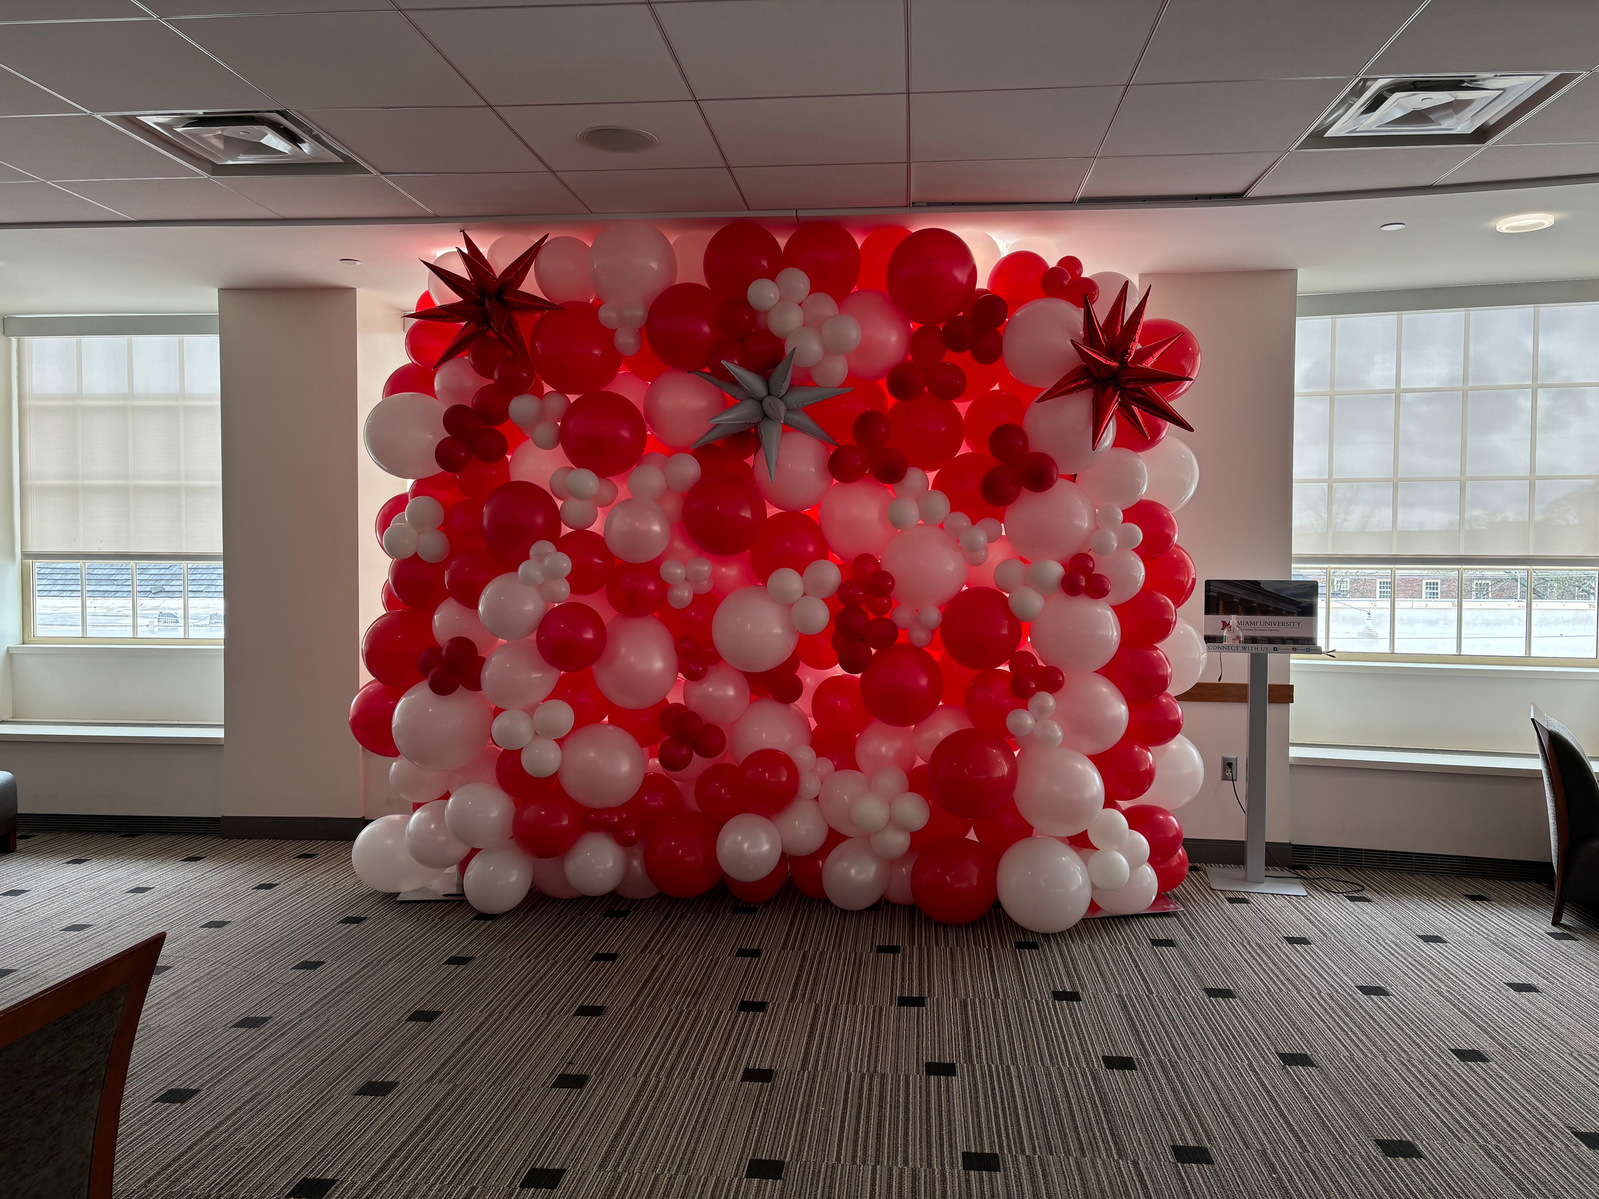 In a dim room near windows is a large balloon wall of red and white balloons with red and grey balloon spikes